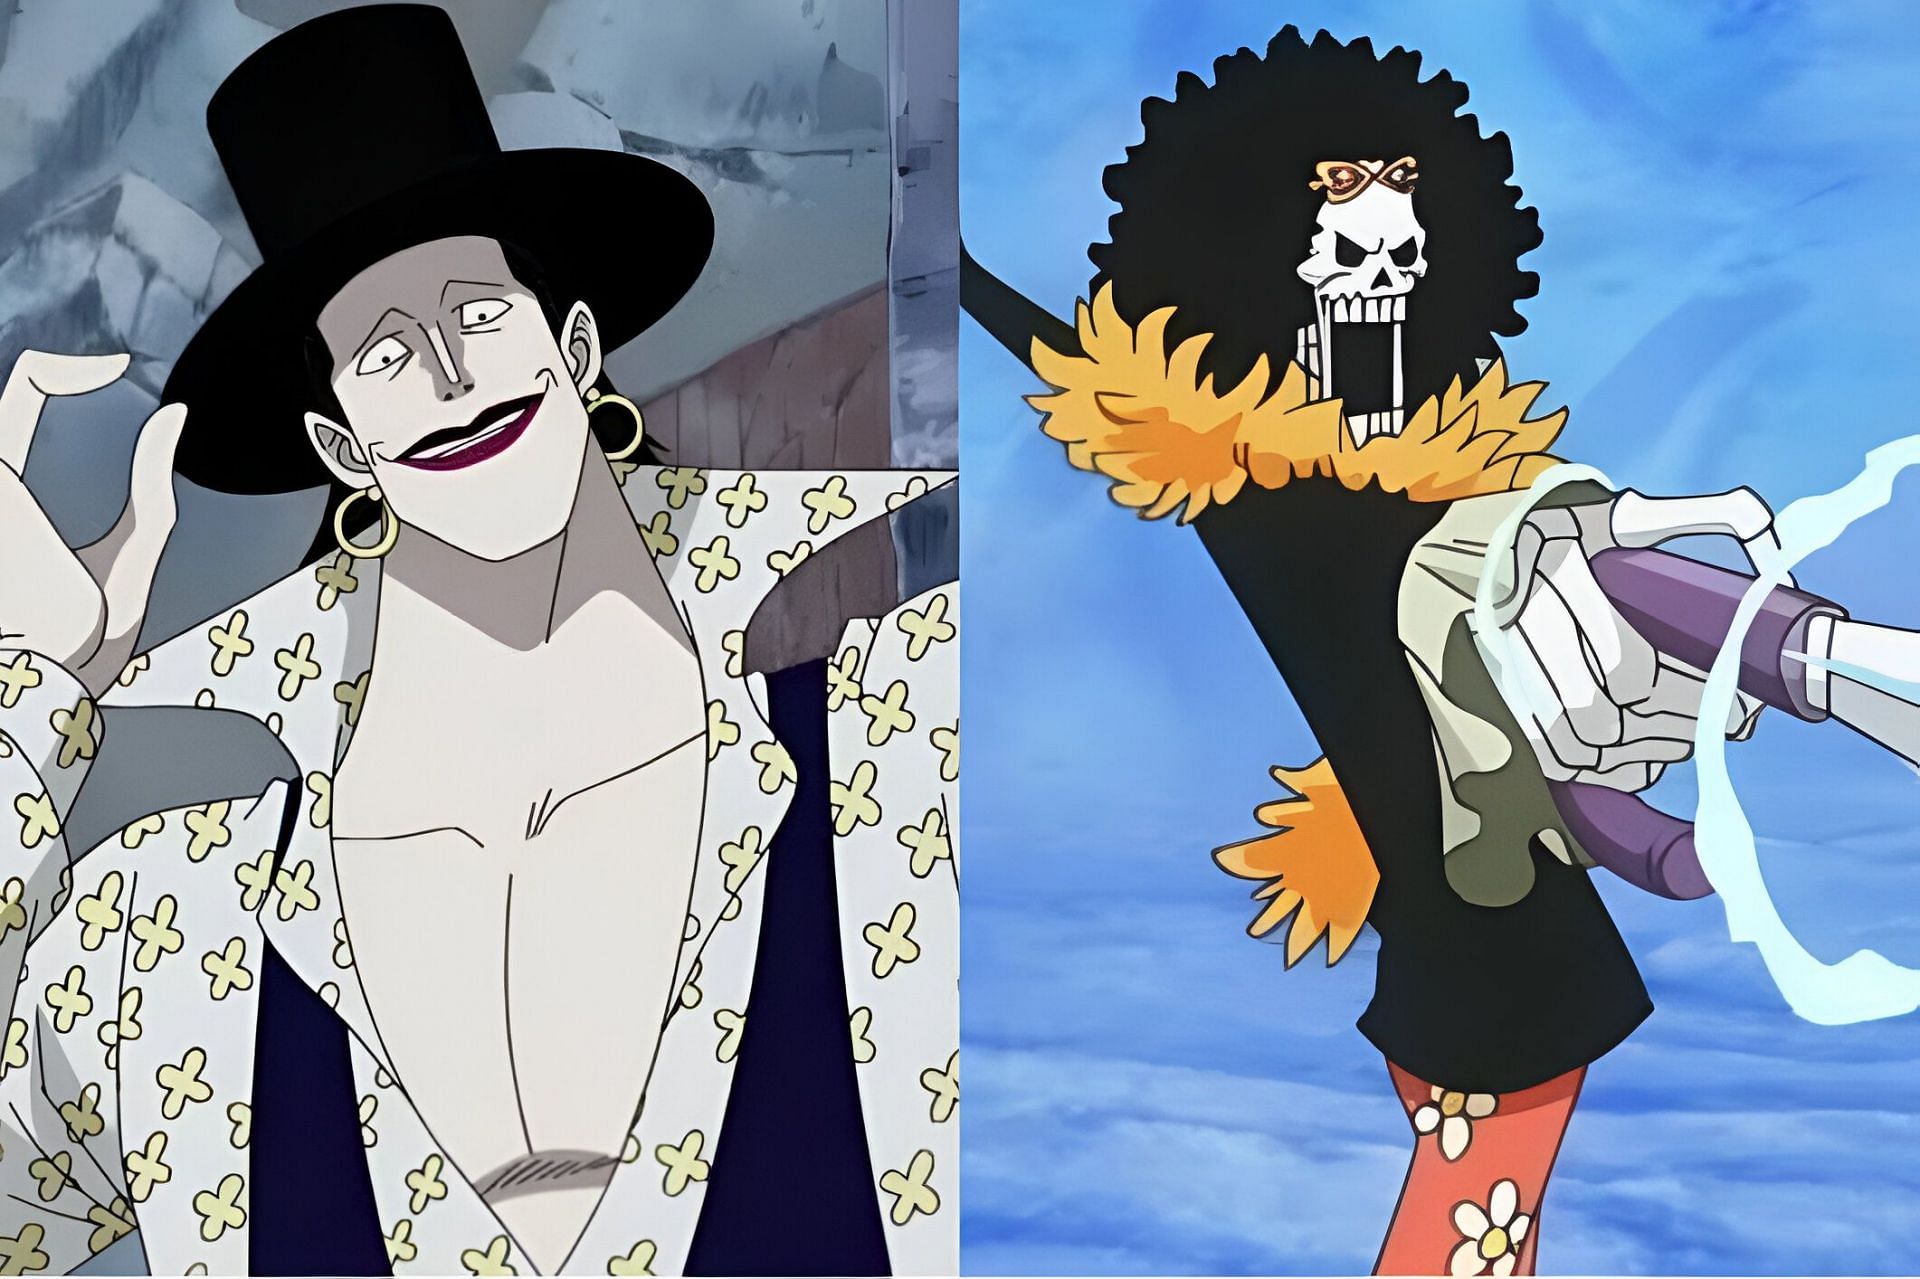 Laffite (left) and Brook (right) as seen in the anime (Image via Toei Animation)